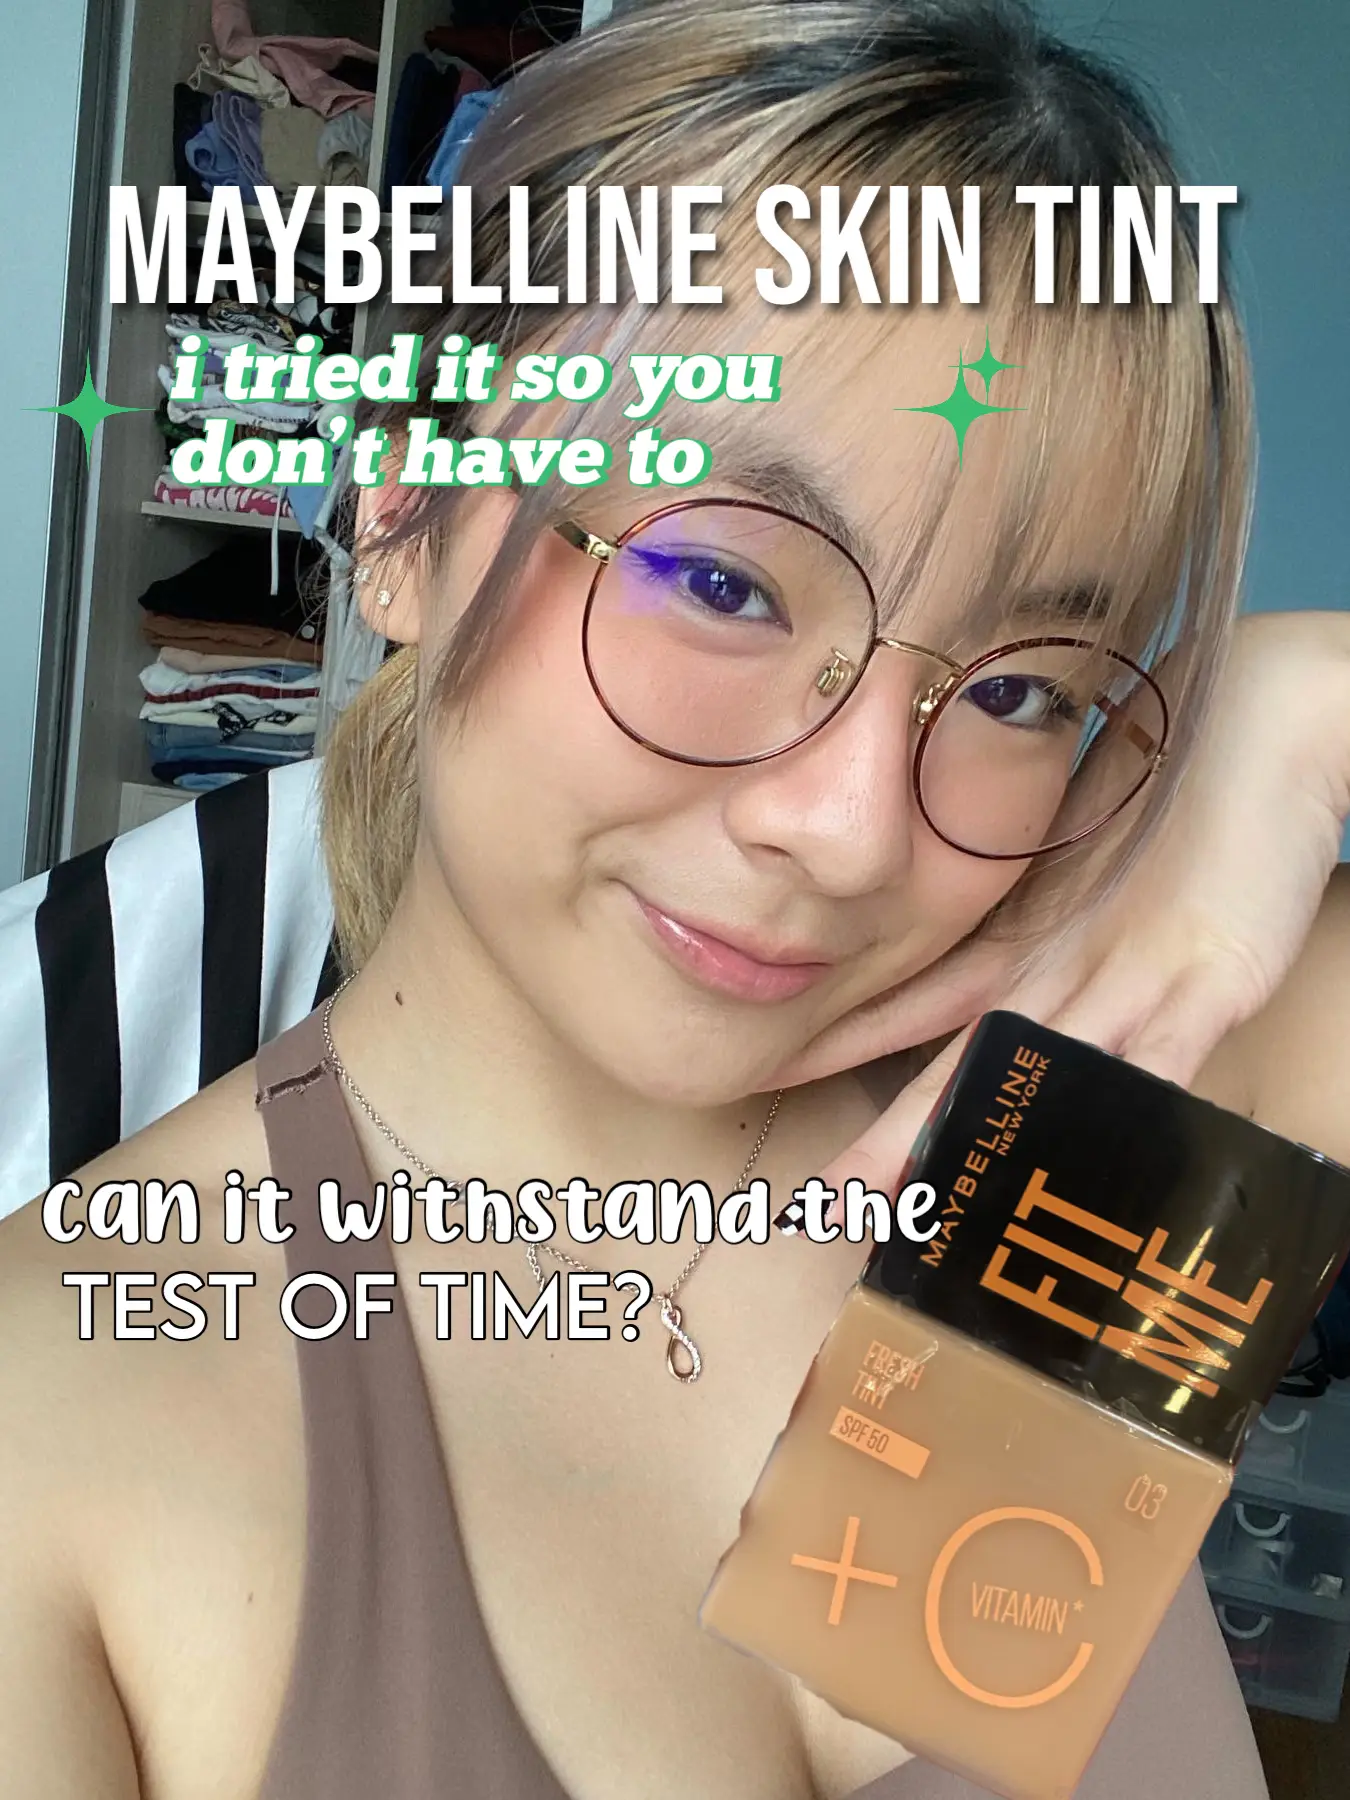 I tried Maybelline's viral Skin Tint and here are my honest thoughts